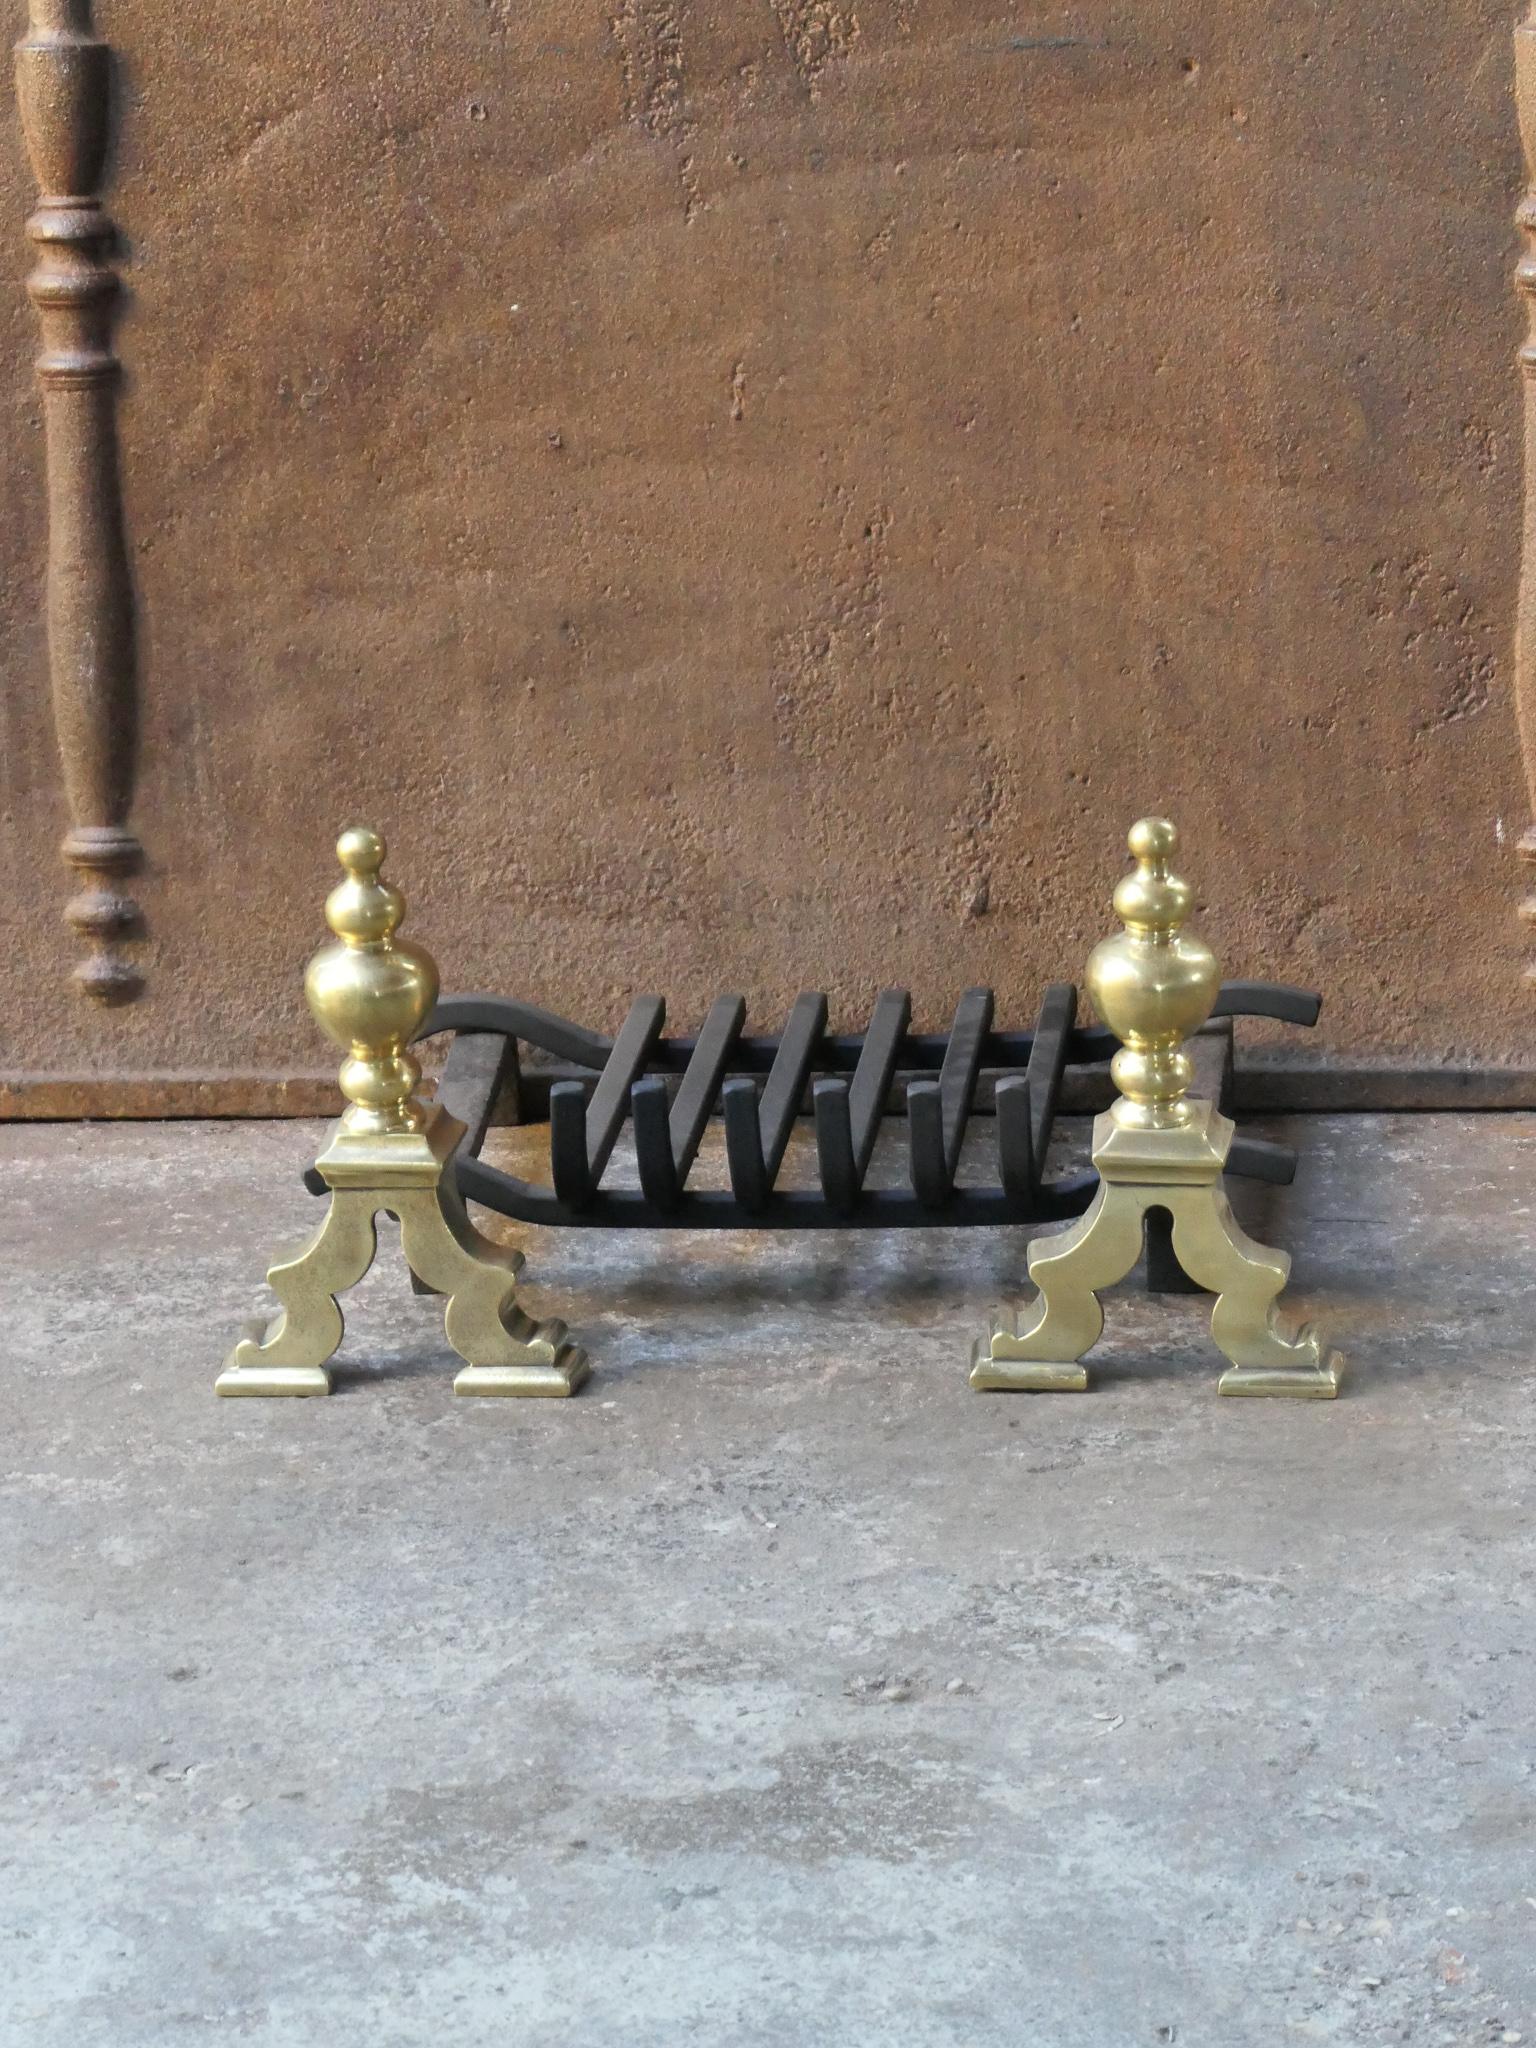 19th-20th century English Victorian fireplace basket, fire grate made of wrought iron and brass. The fireplace grate is in a good condition and is fit for use in the fireplace.







